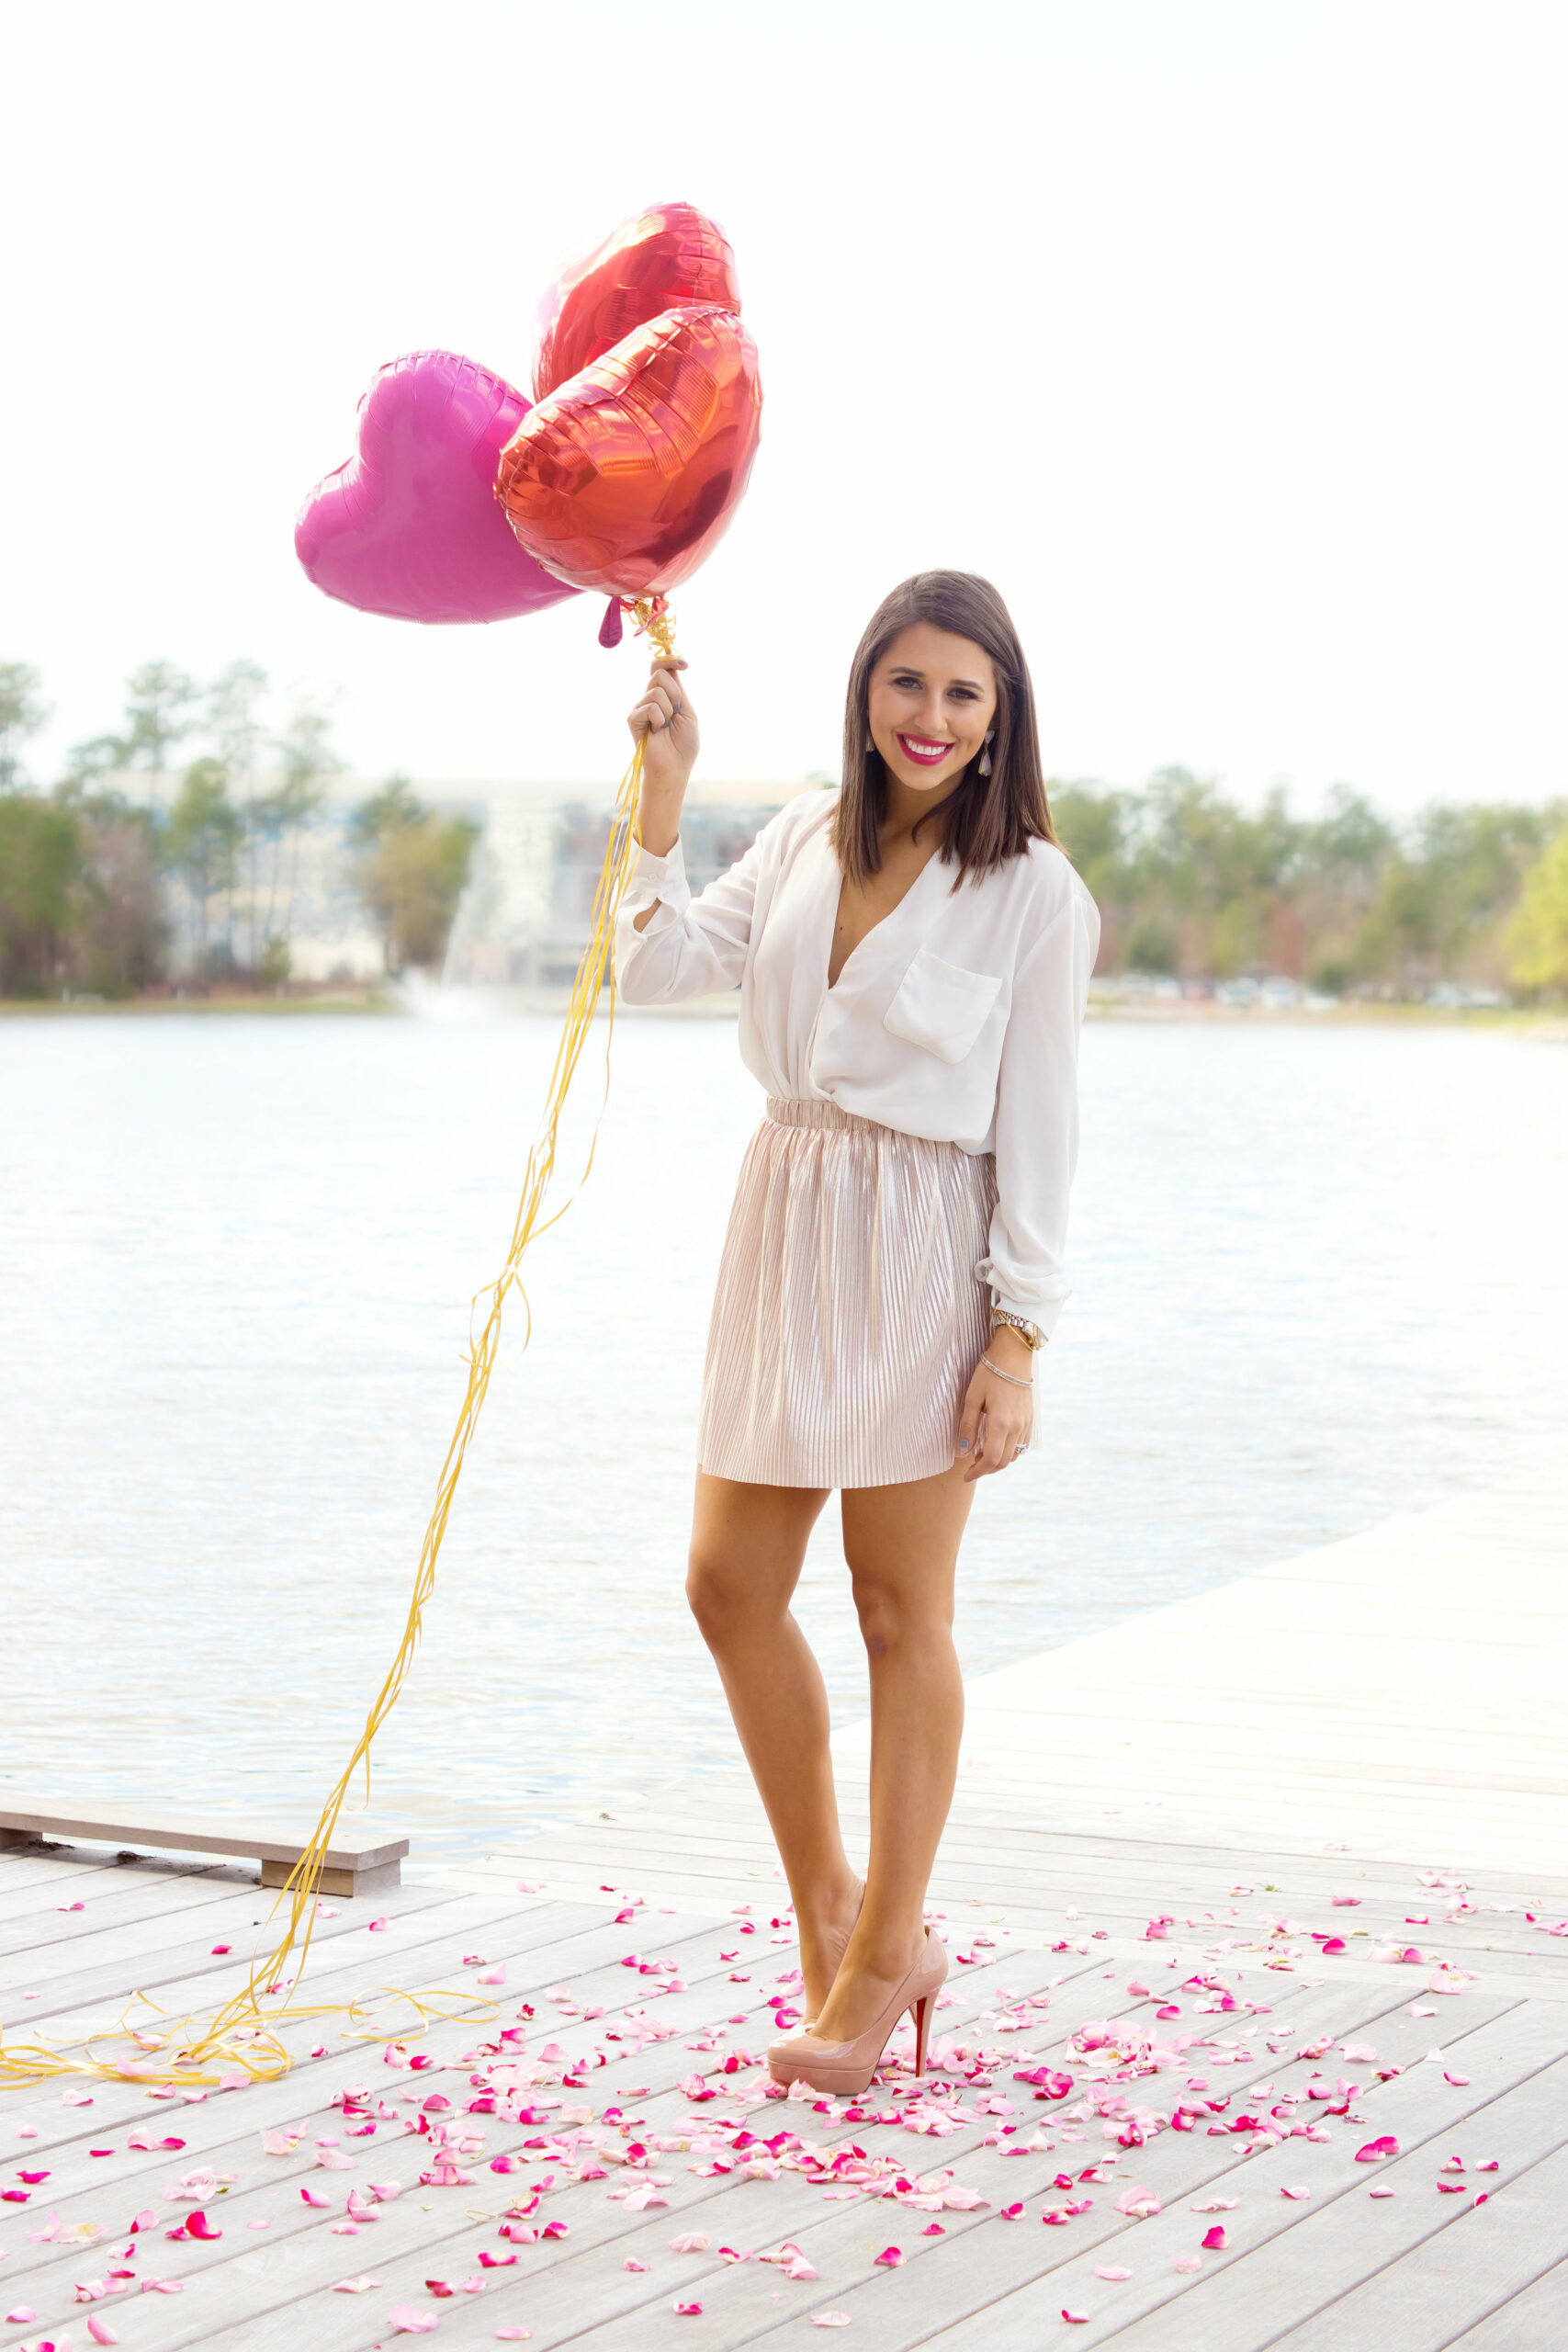 View More: http://diamondoakphotography.pass.us/valentines_011916